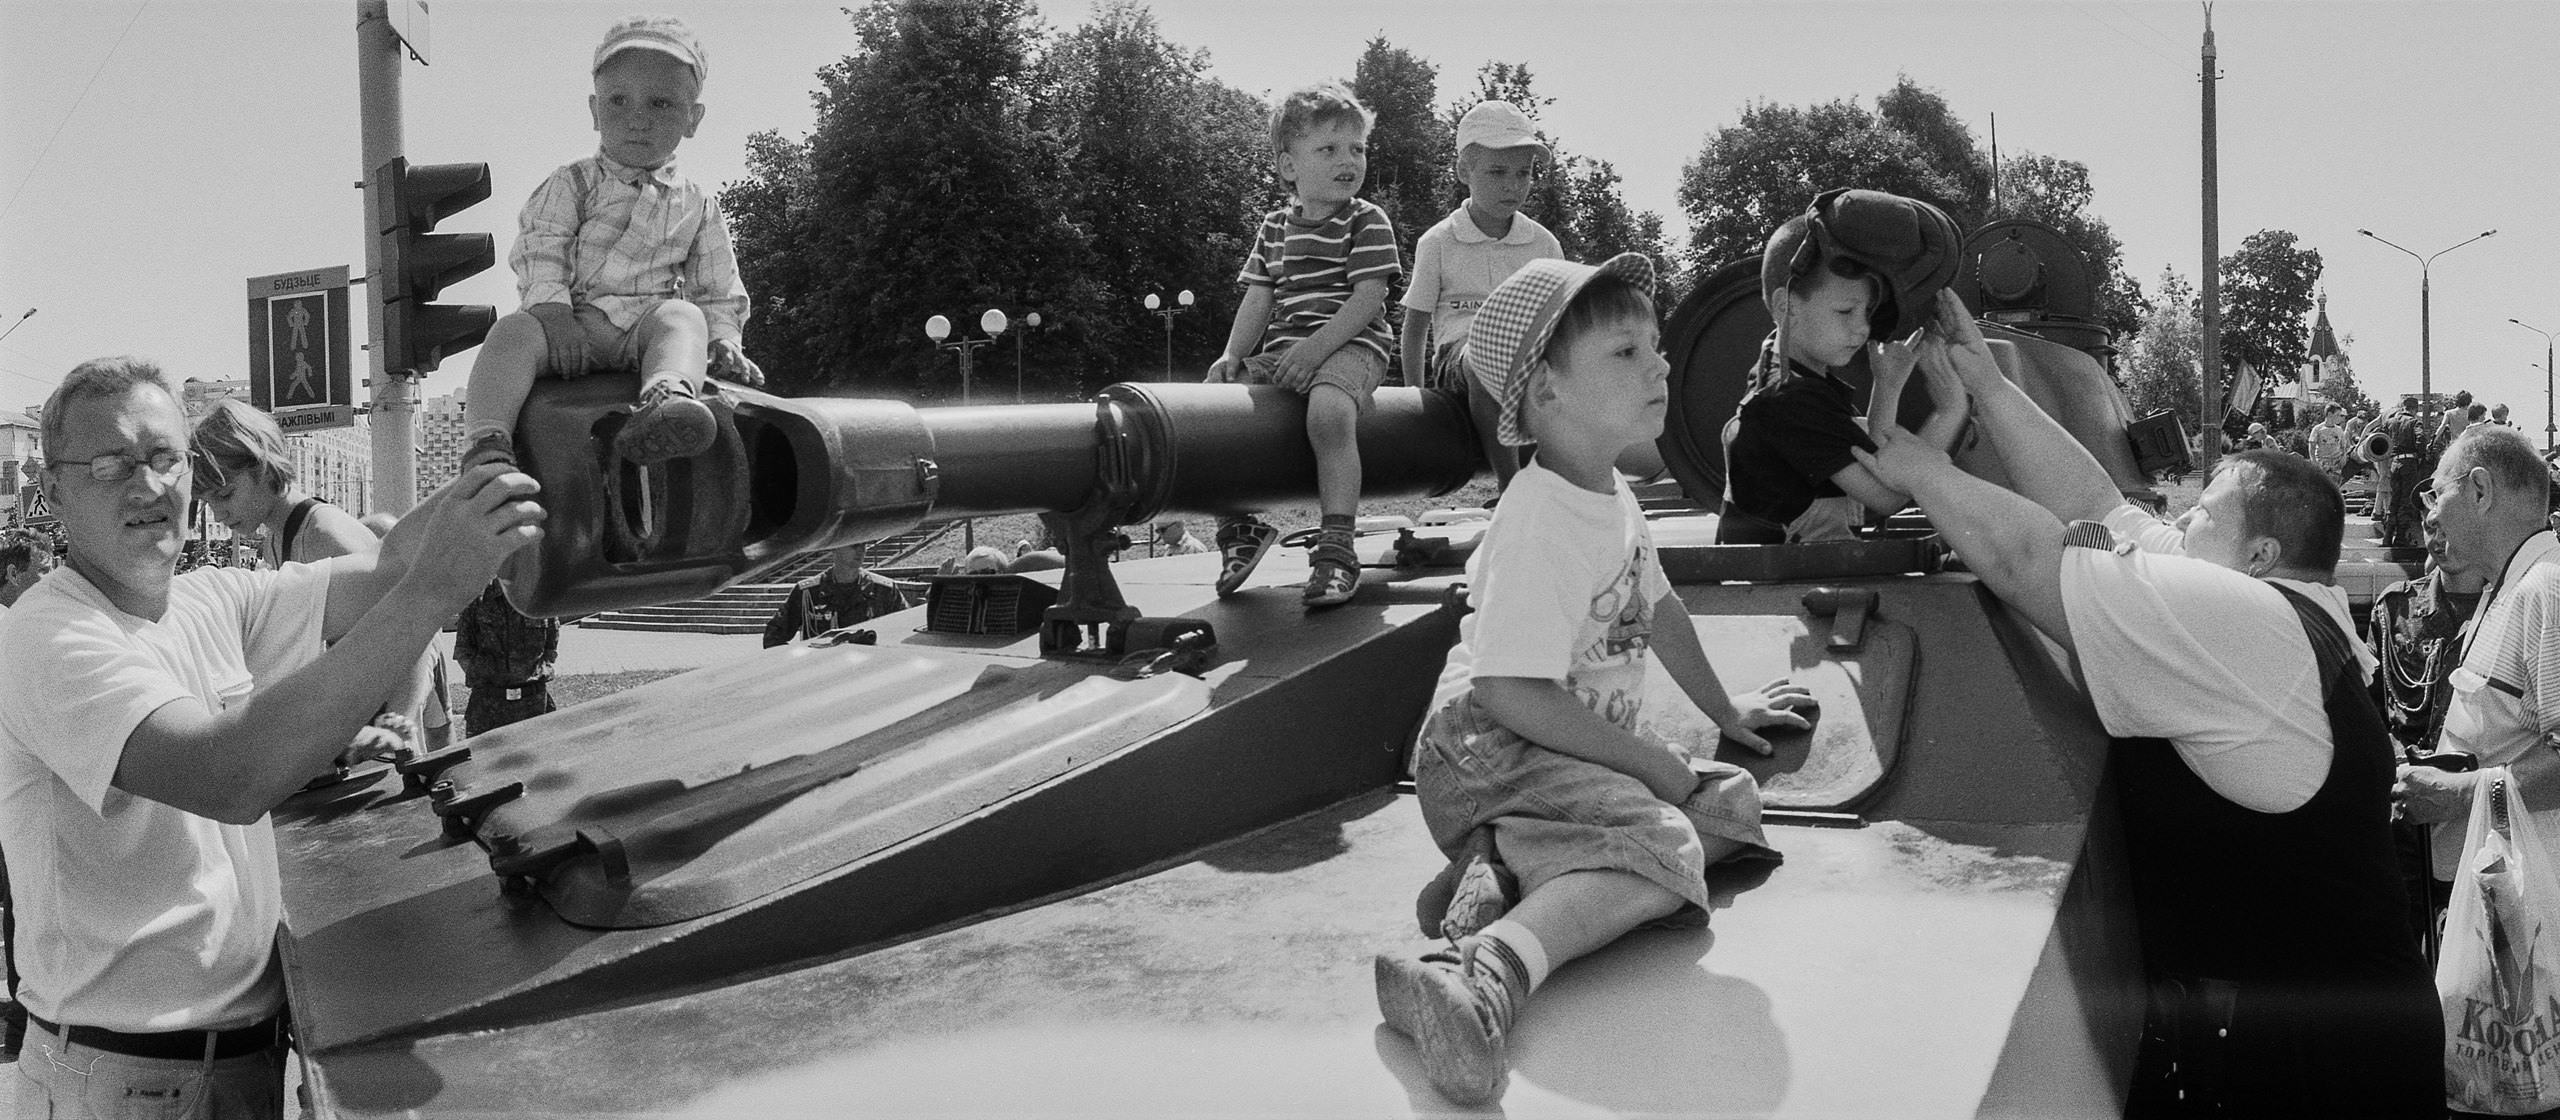 Small children playing on a tank after the military parade dedicated to the Independence Day of the Republic of Belarus